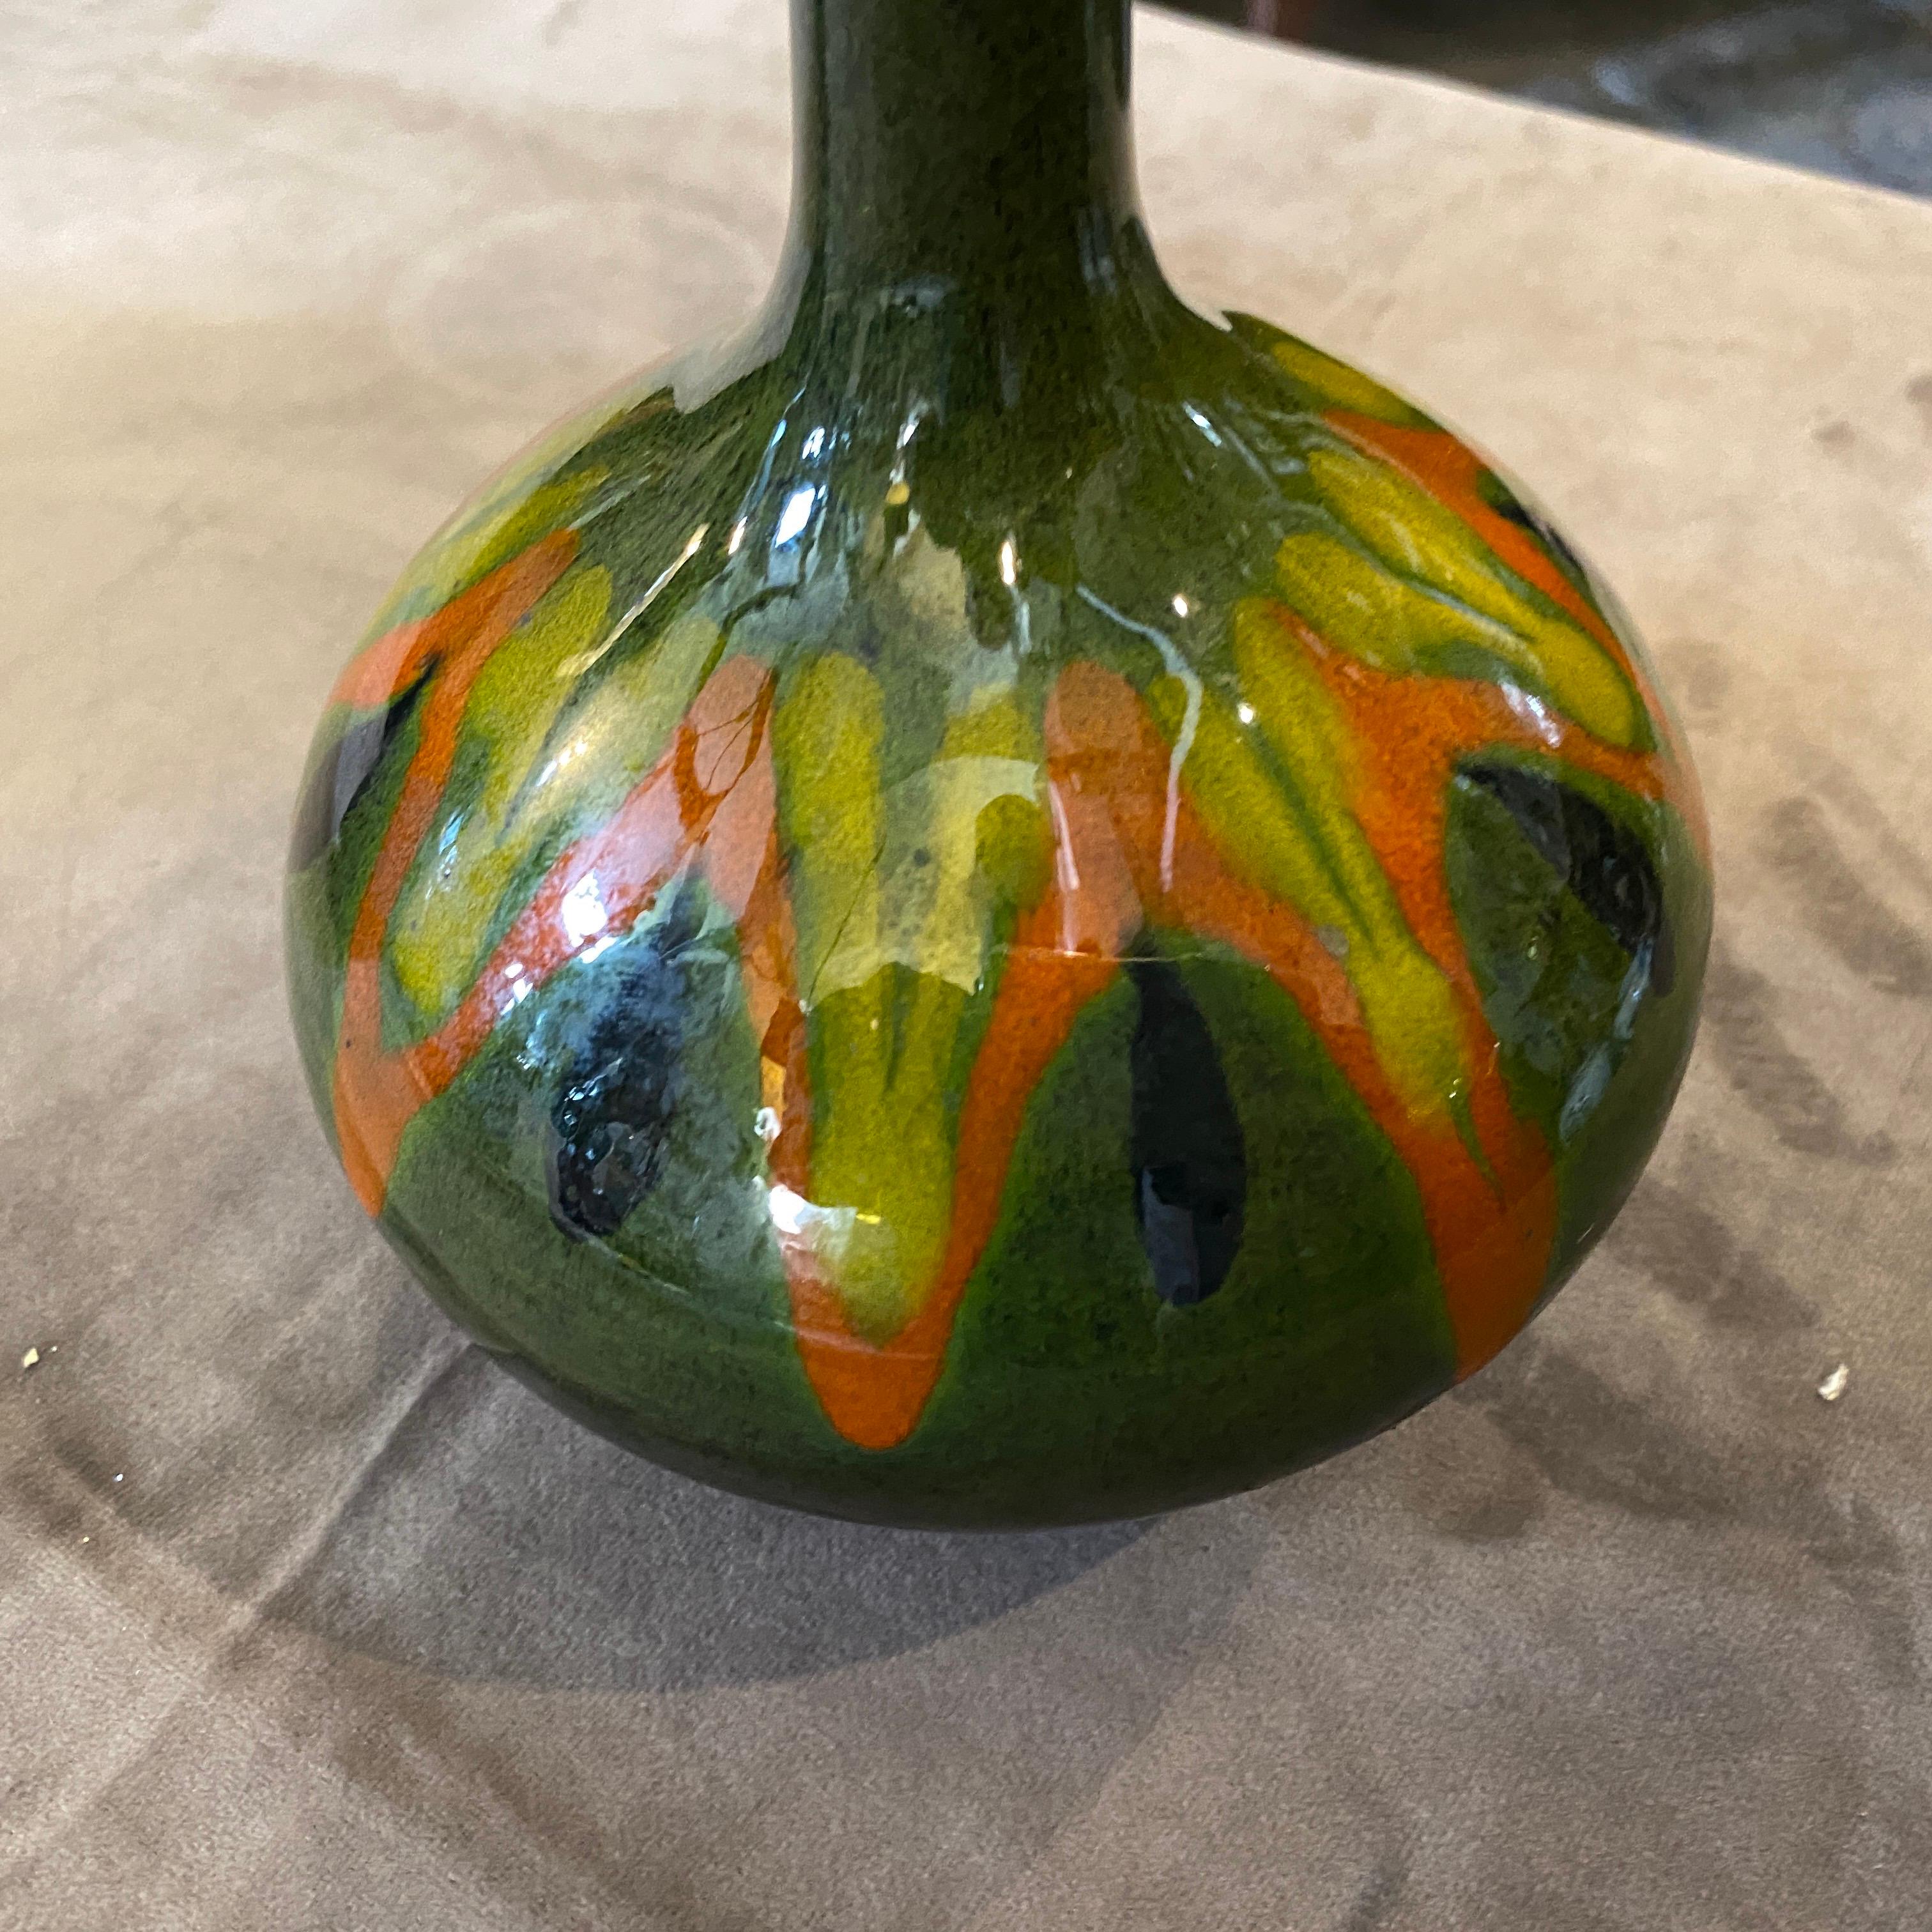 A particular green, red and yellow ceramic vase made in Italy in the Seventies by Bertoncello. Vase, it's in perfect conditions. Bertoncello, an Italian ceramics company, was known for producing unique and stylish ceramic pieces during the mid-20th